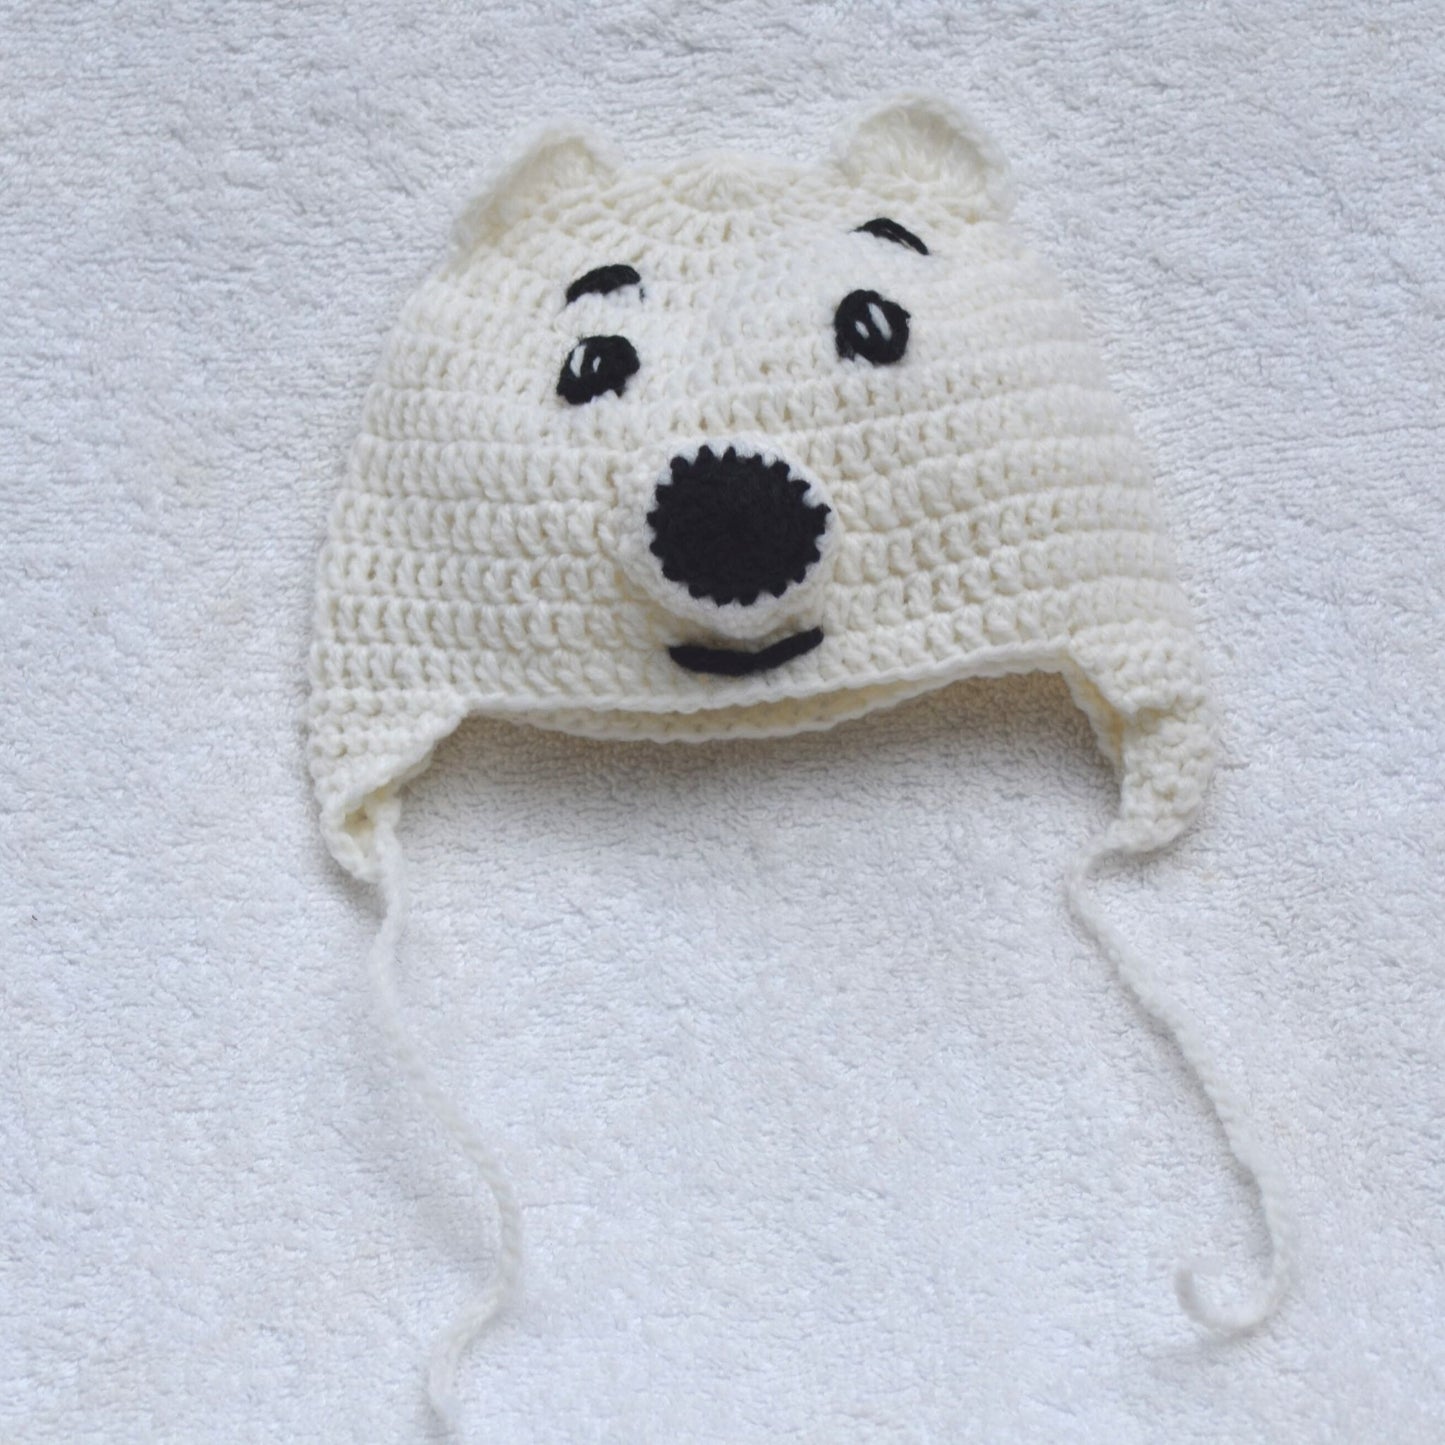 Crochet Baby Animal Hats 0 to 3 month size